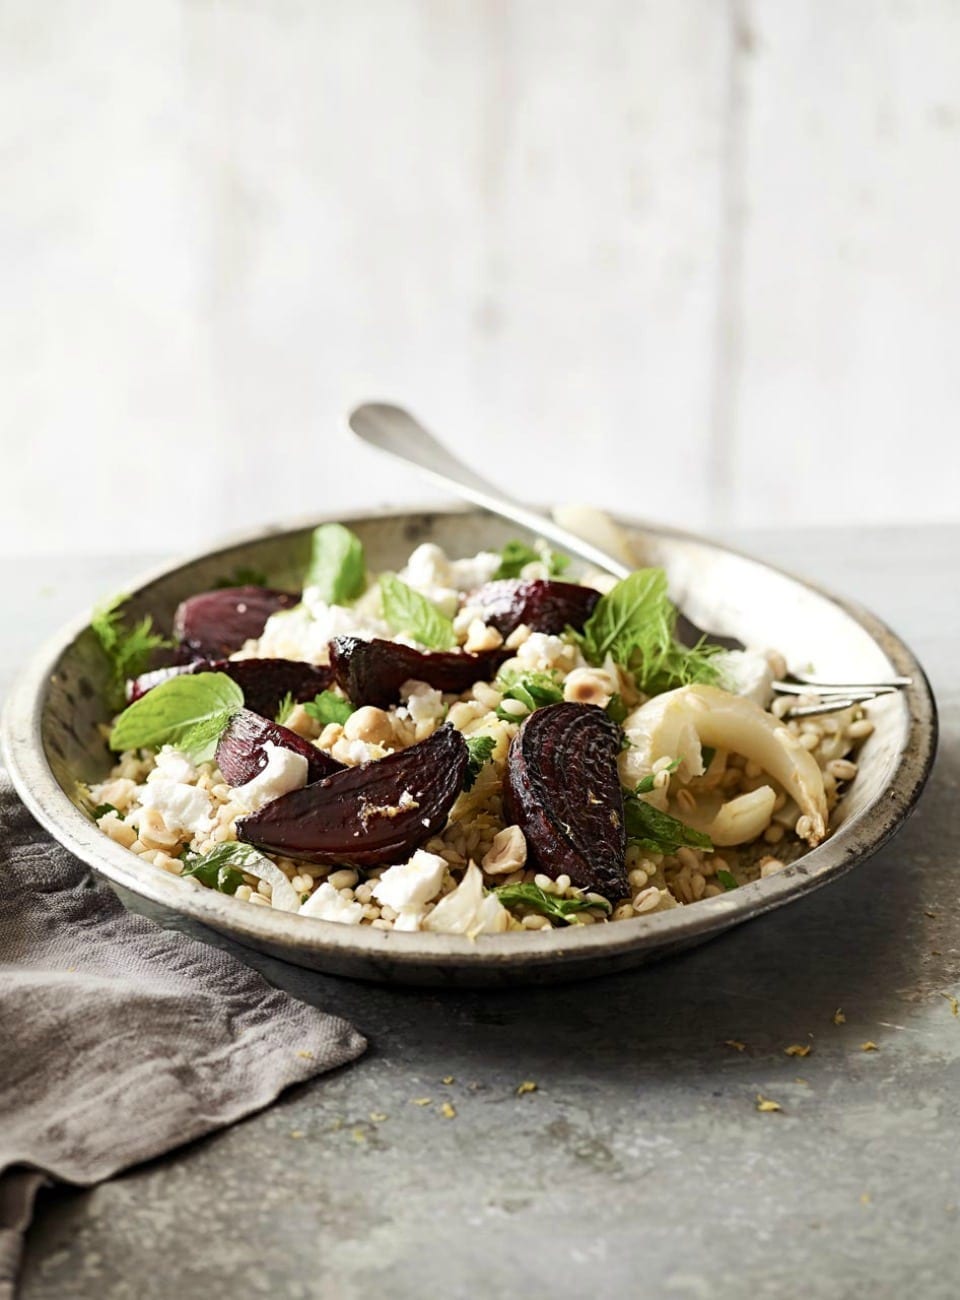 Roast beetroot, barley and fennel salad recipe | delicious. magazine